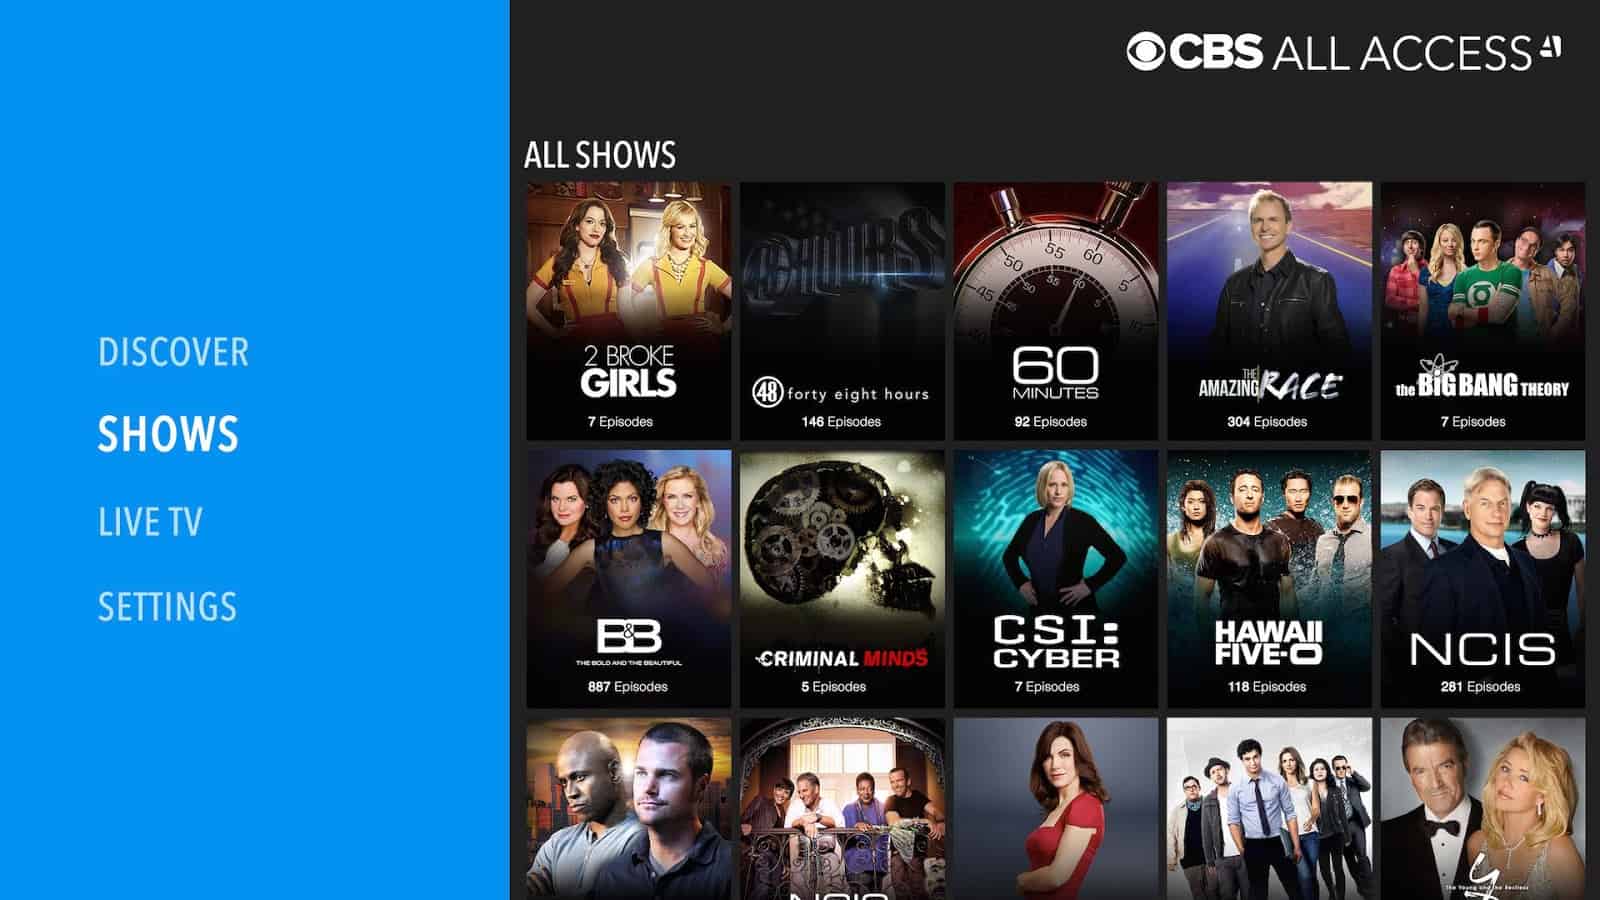 What is CBS All Access